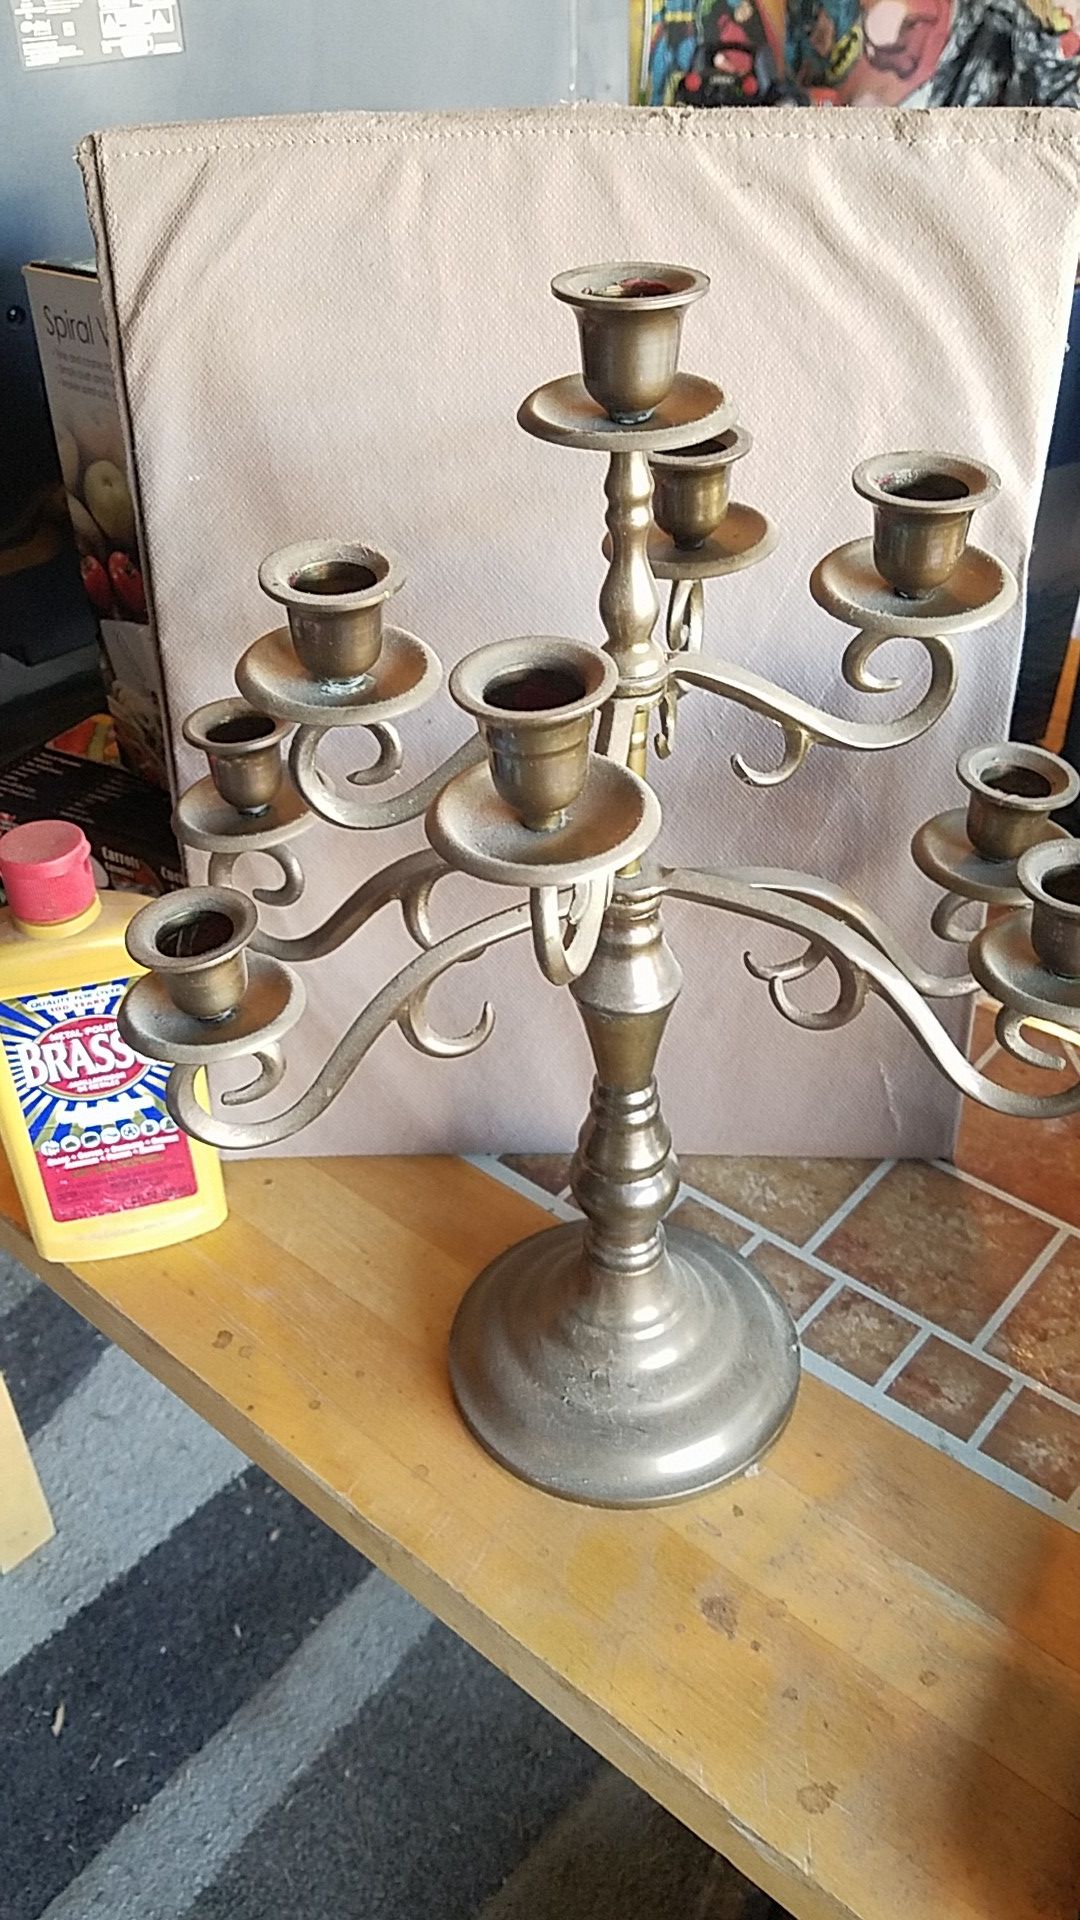 Antique 9 candle brass candelabra 15" x 12" includes free Brasso cleaner!